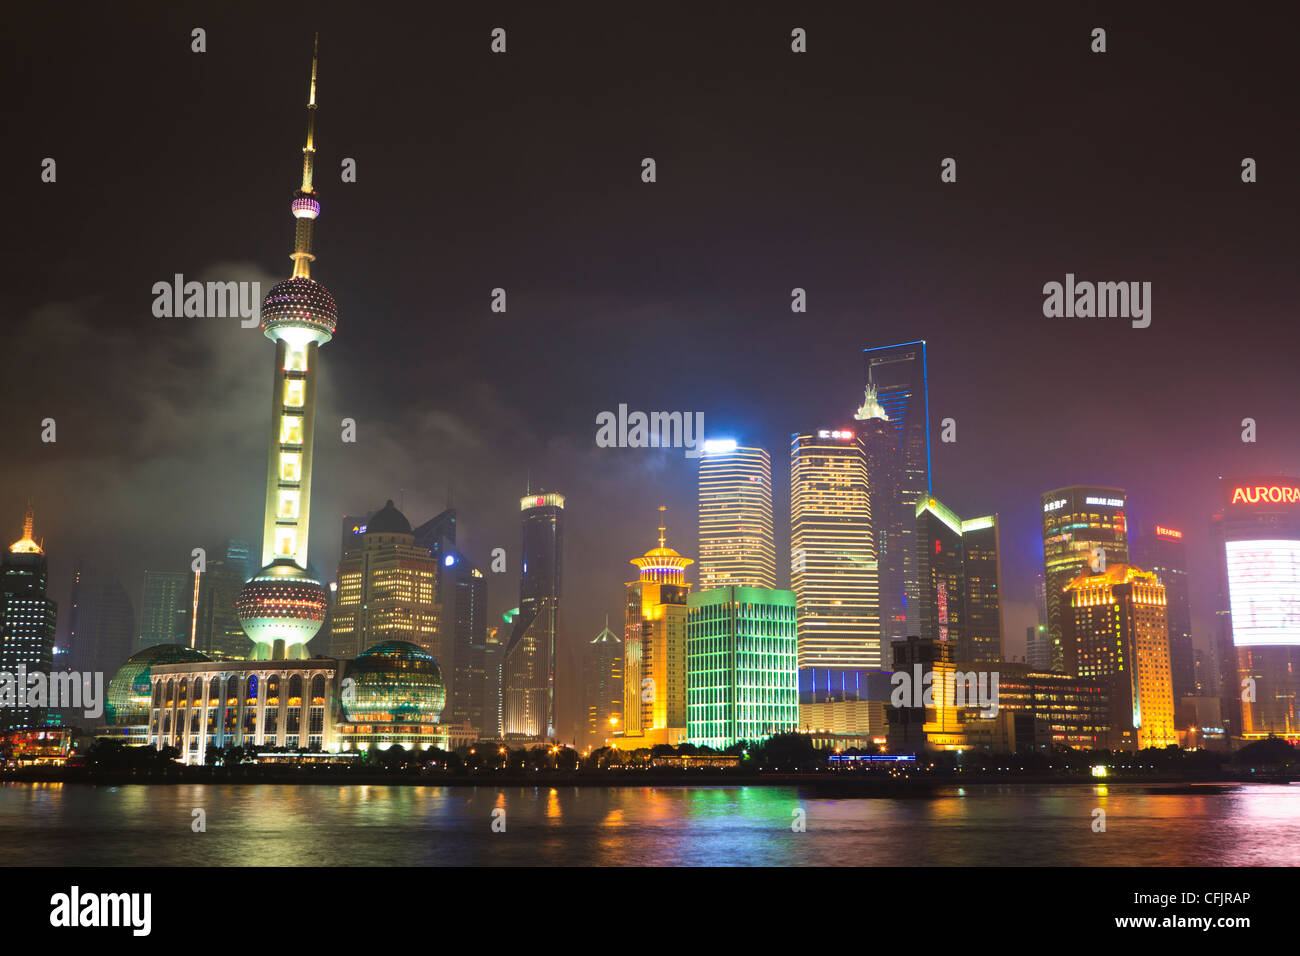 Pudong skyline at night across the Huangpu River, Oriental Pearl tower on left, Shanghai, China, Asia Stock Photo